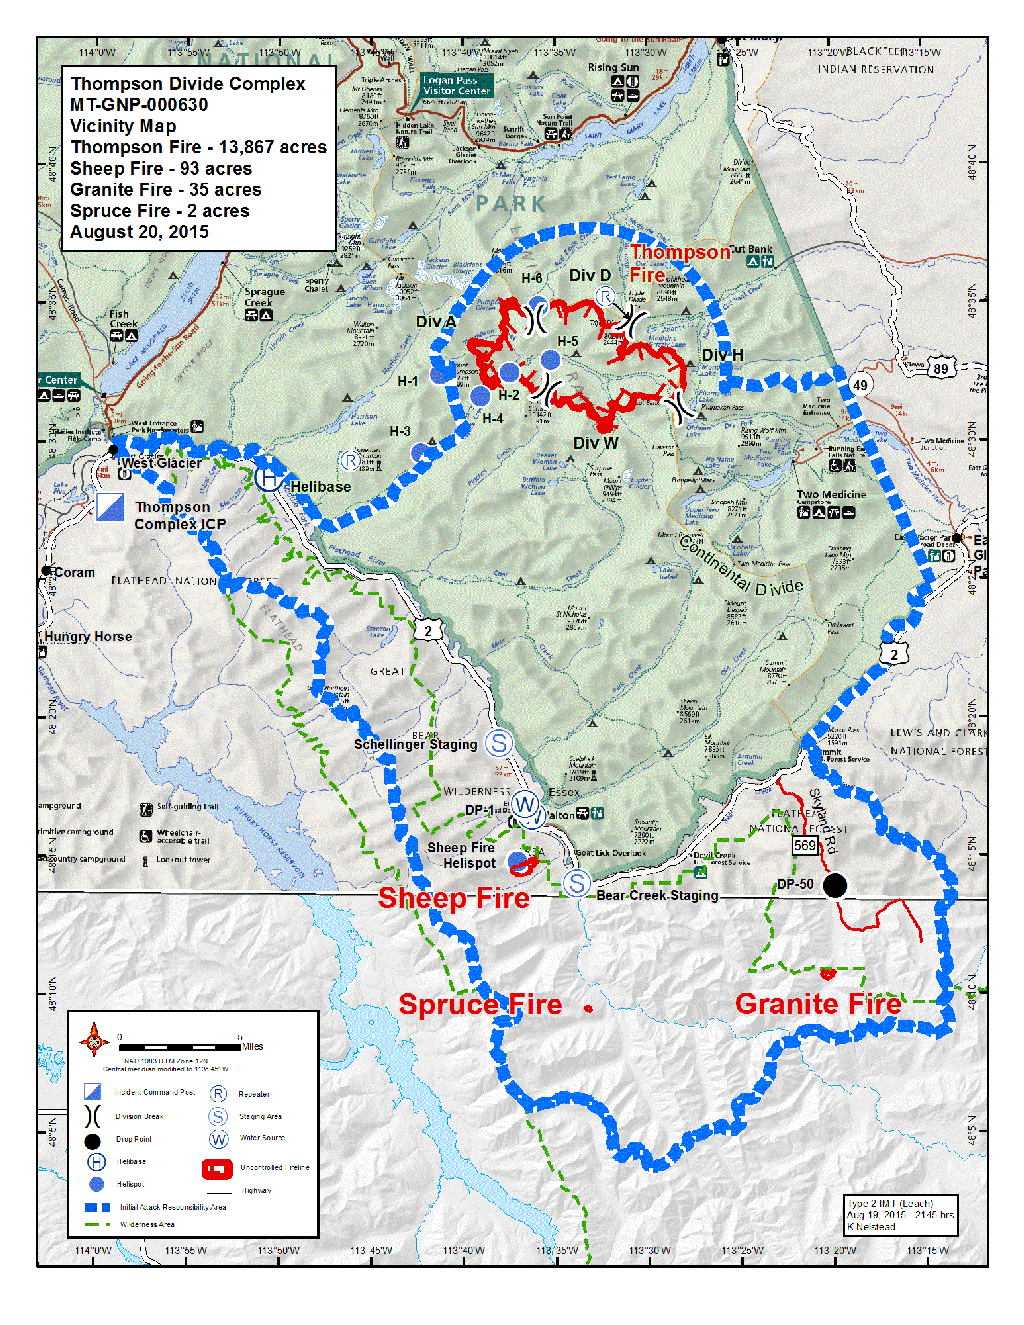 Thompson-Divide Complex Vicinity Map Aug 20 2015